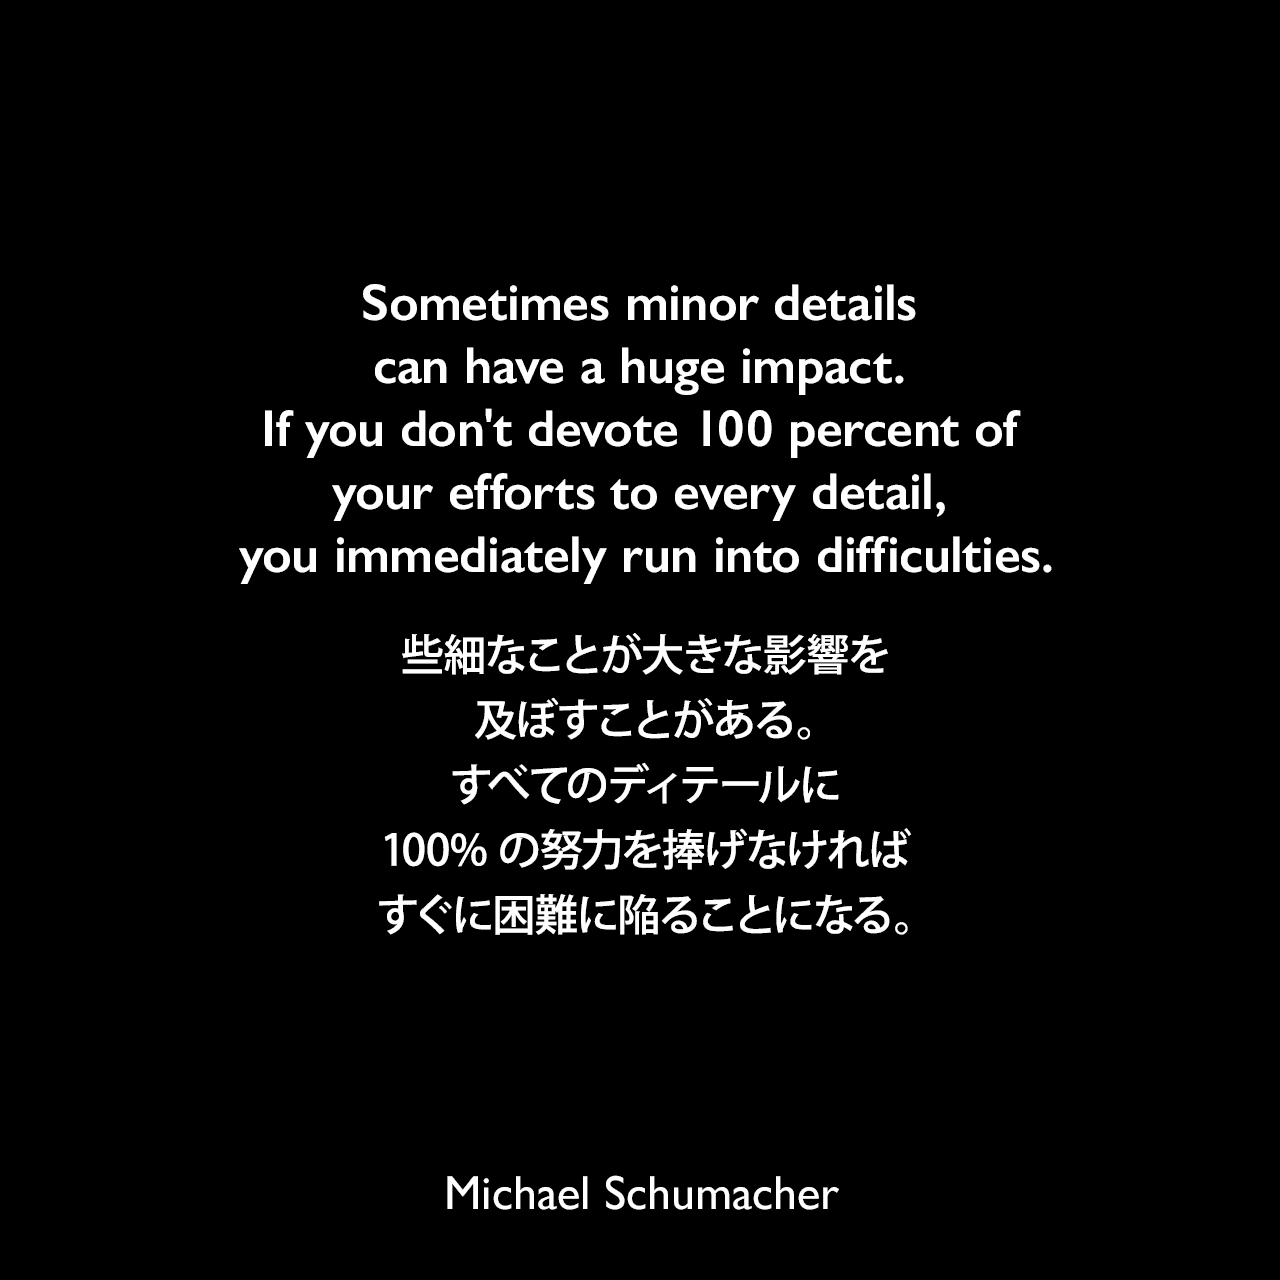 Sometimes minor details can have a huge impact. If you don't devote 100 percent of your efforts to every detail, you immediately run into difficulties.些細なことが大きな影響を及ぼすことがある。すべてのディテールに100%の努力を捧げなければ、すぐに困難に陥ることになる。Michael Schumacher